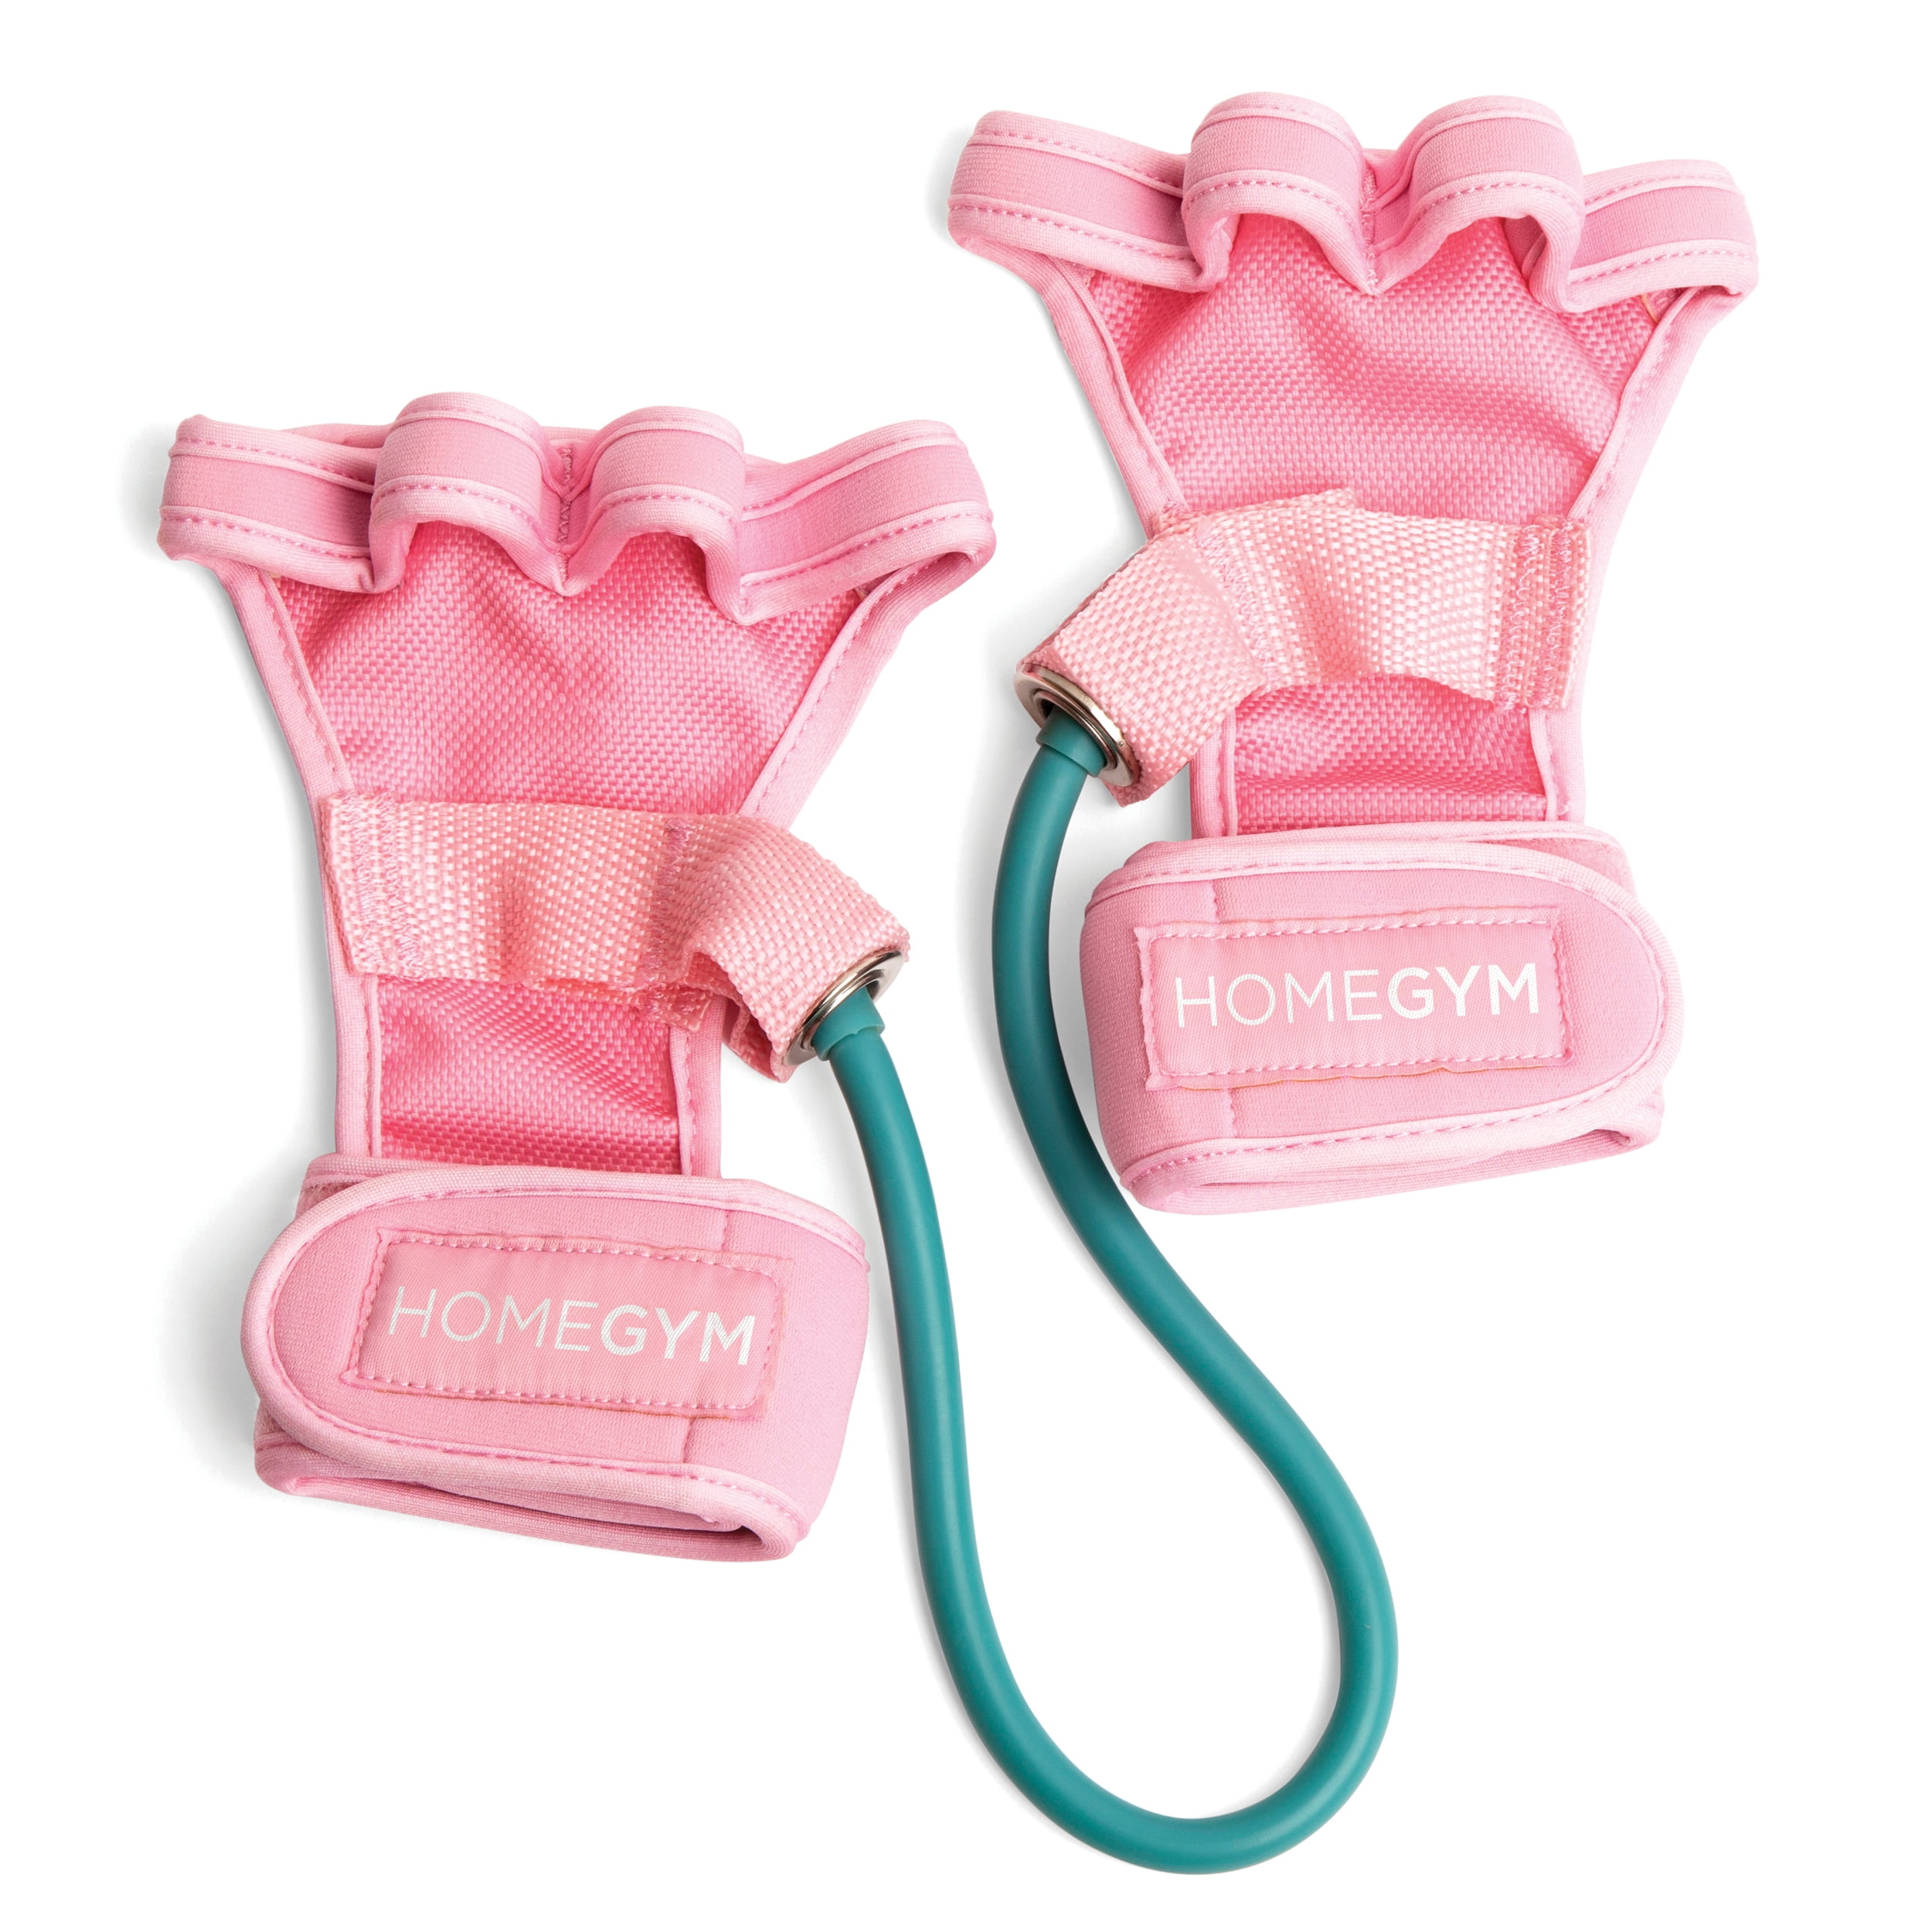 HomeGym Exercise Gloves with Adjustable Strap and Finger Loops, Pink Teal, One-Size